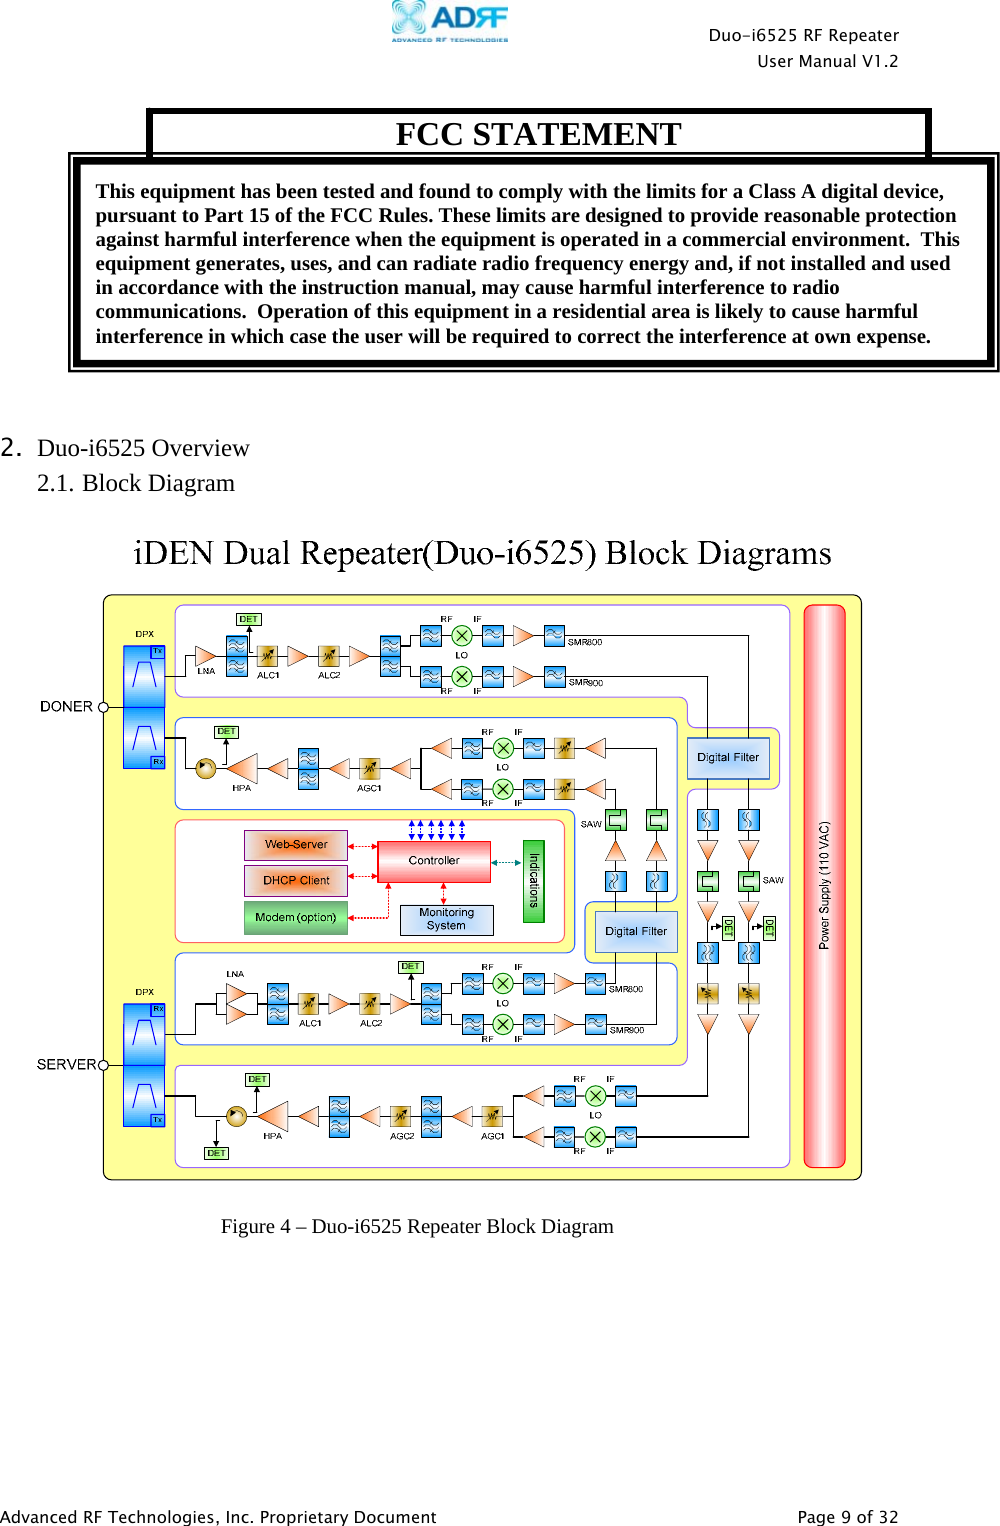    Duo-i6525 RF Repeater  User Manual V1.2  Advanced RF Technologies, Inc. Proprietary Document   Page 9 of 32        2. Duo-i6525 Overview 2.1. Block Diagram   FCC STATEMENT  Figure 4 – Duo-i6525 Repeater Block Diagram This equipment has been tested and found to comply with the limits for a Class A digital device, pursuant to Part 15 of the FCC Rules. These limits are designed to provide reasonable protection against harmful interference when the equipment is operated in a commercial environment.  This equipment generates, uses, and can radiate radio frequency energy and, if not installed and used in accordance with the instruction manual, may cause harmful interference to radio communications.  Operation of this equipment in a residential area is likely to cause harmful interference in which case the user will be required to correct the interference at own expense. 